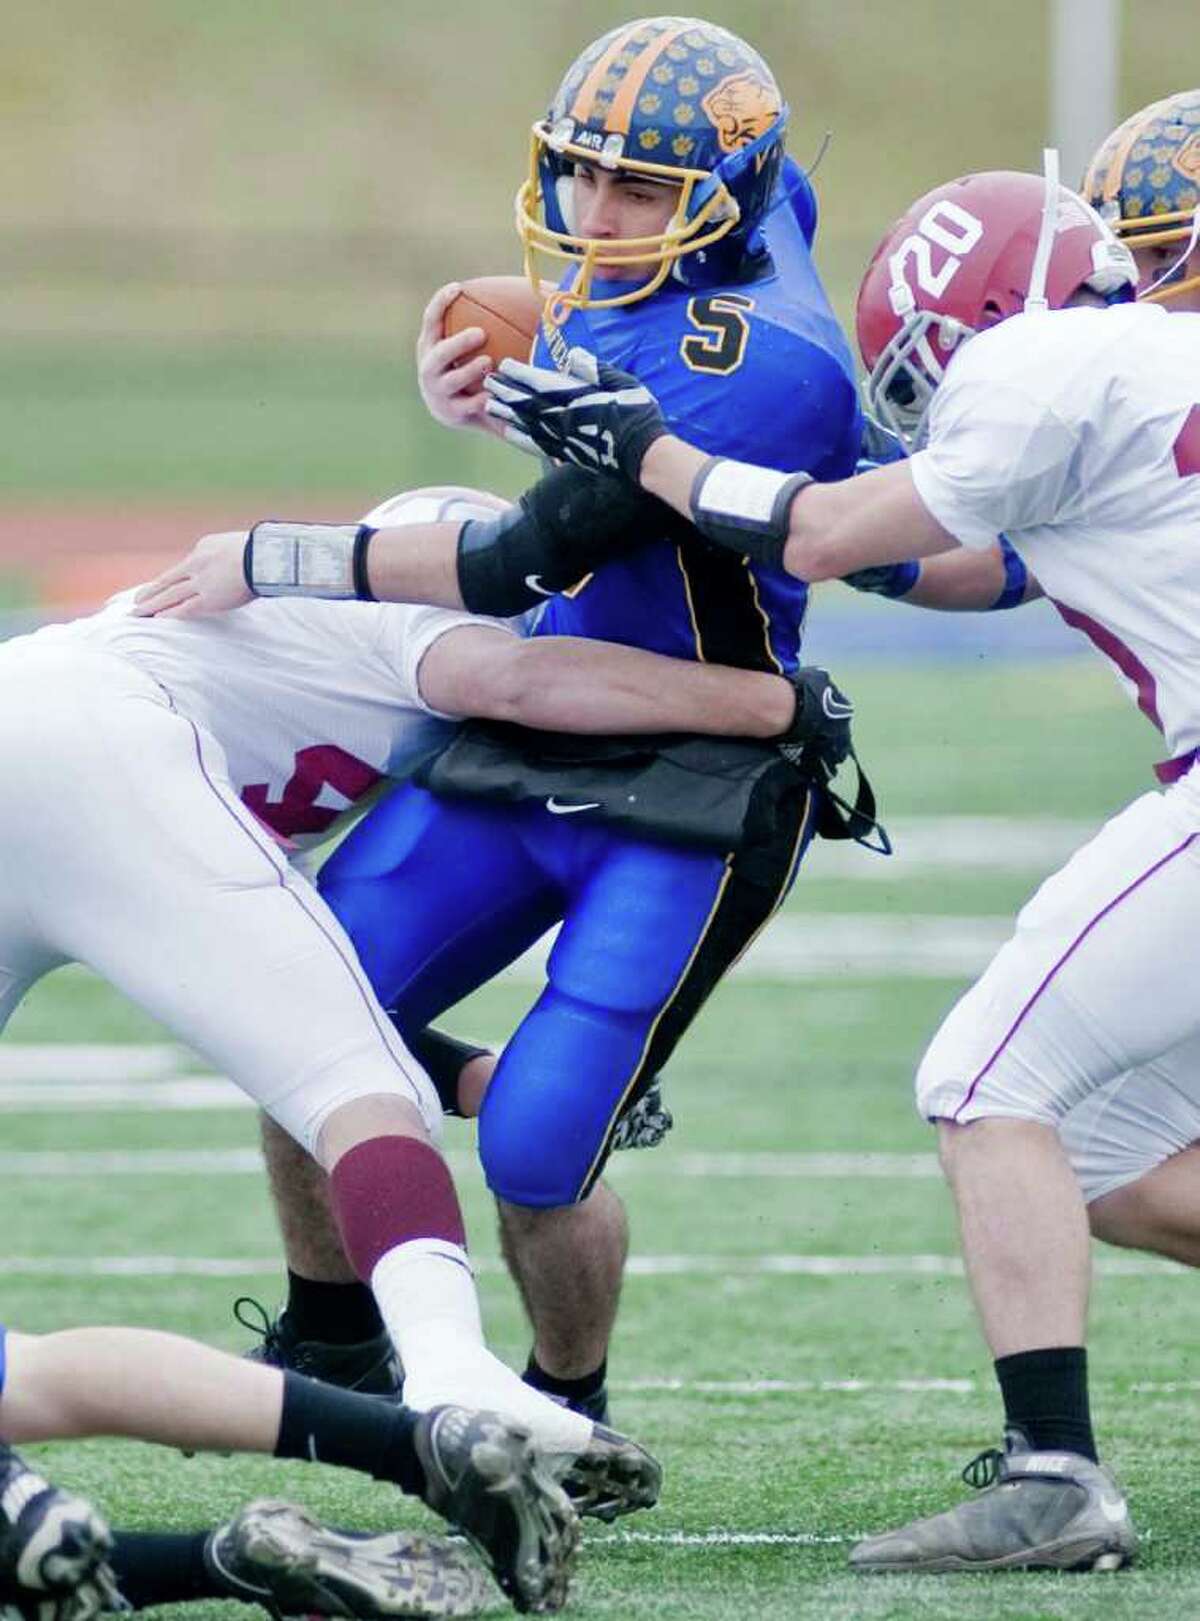 Brookfield's Nick Paez tries to break free during a football game against Bethel at Brookfield. Thursday, Nov. 25, 2010